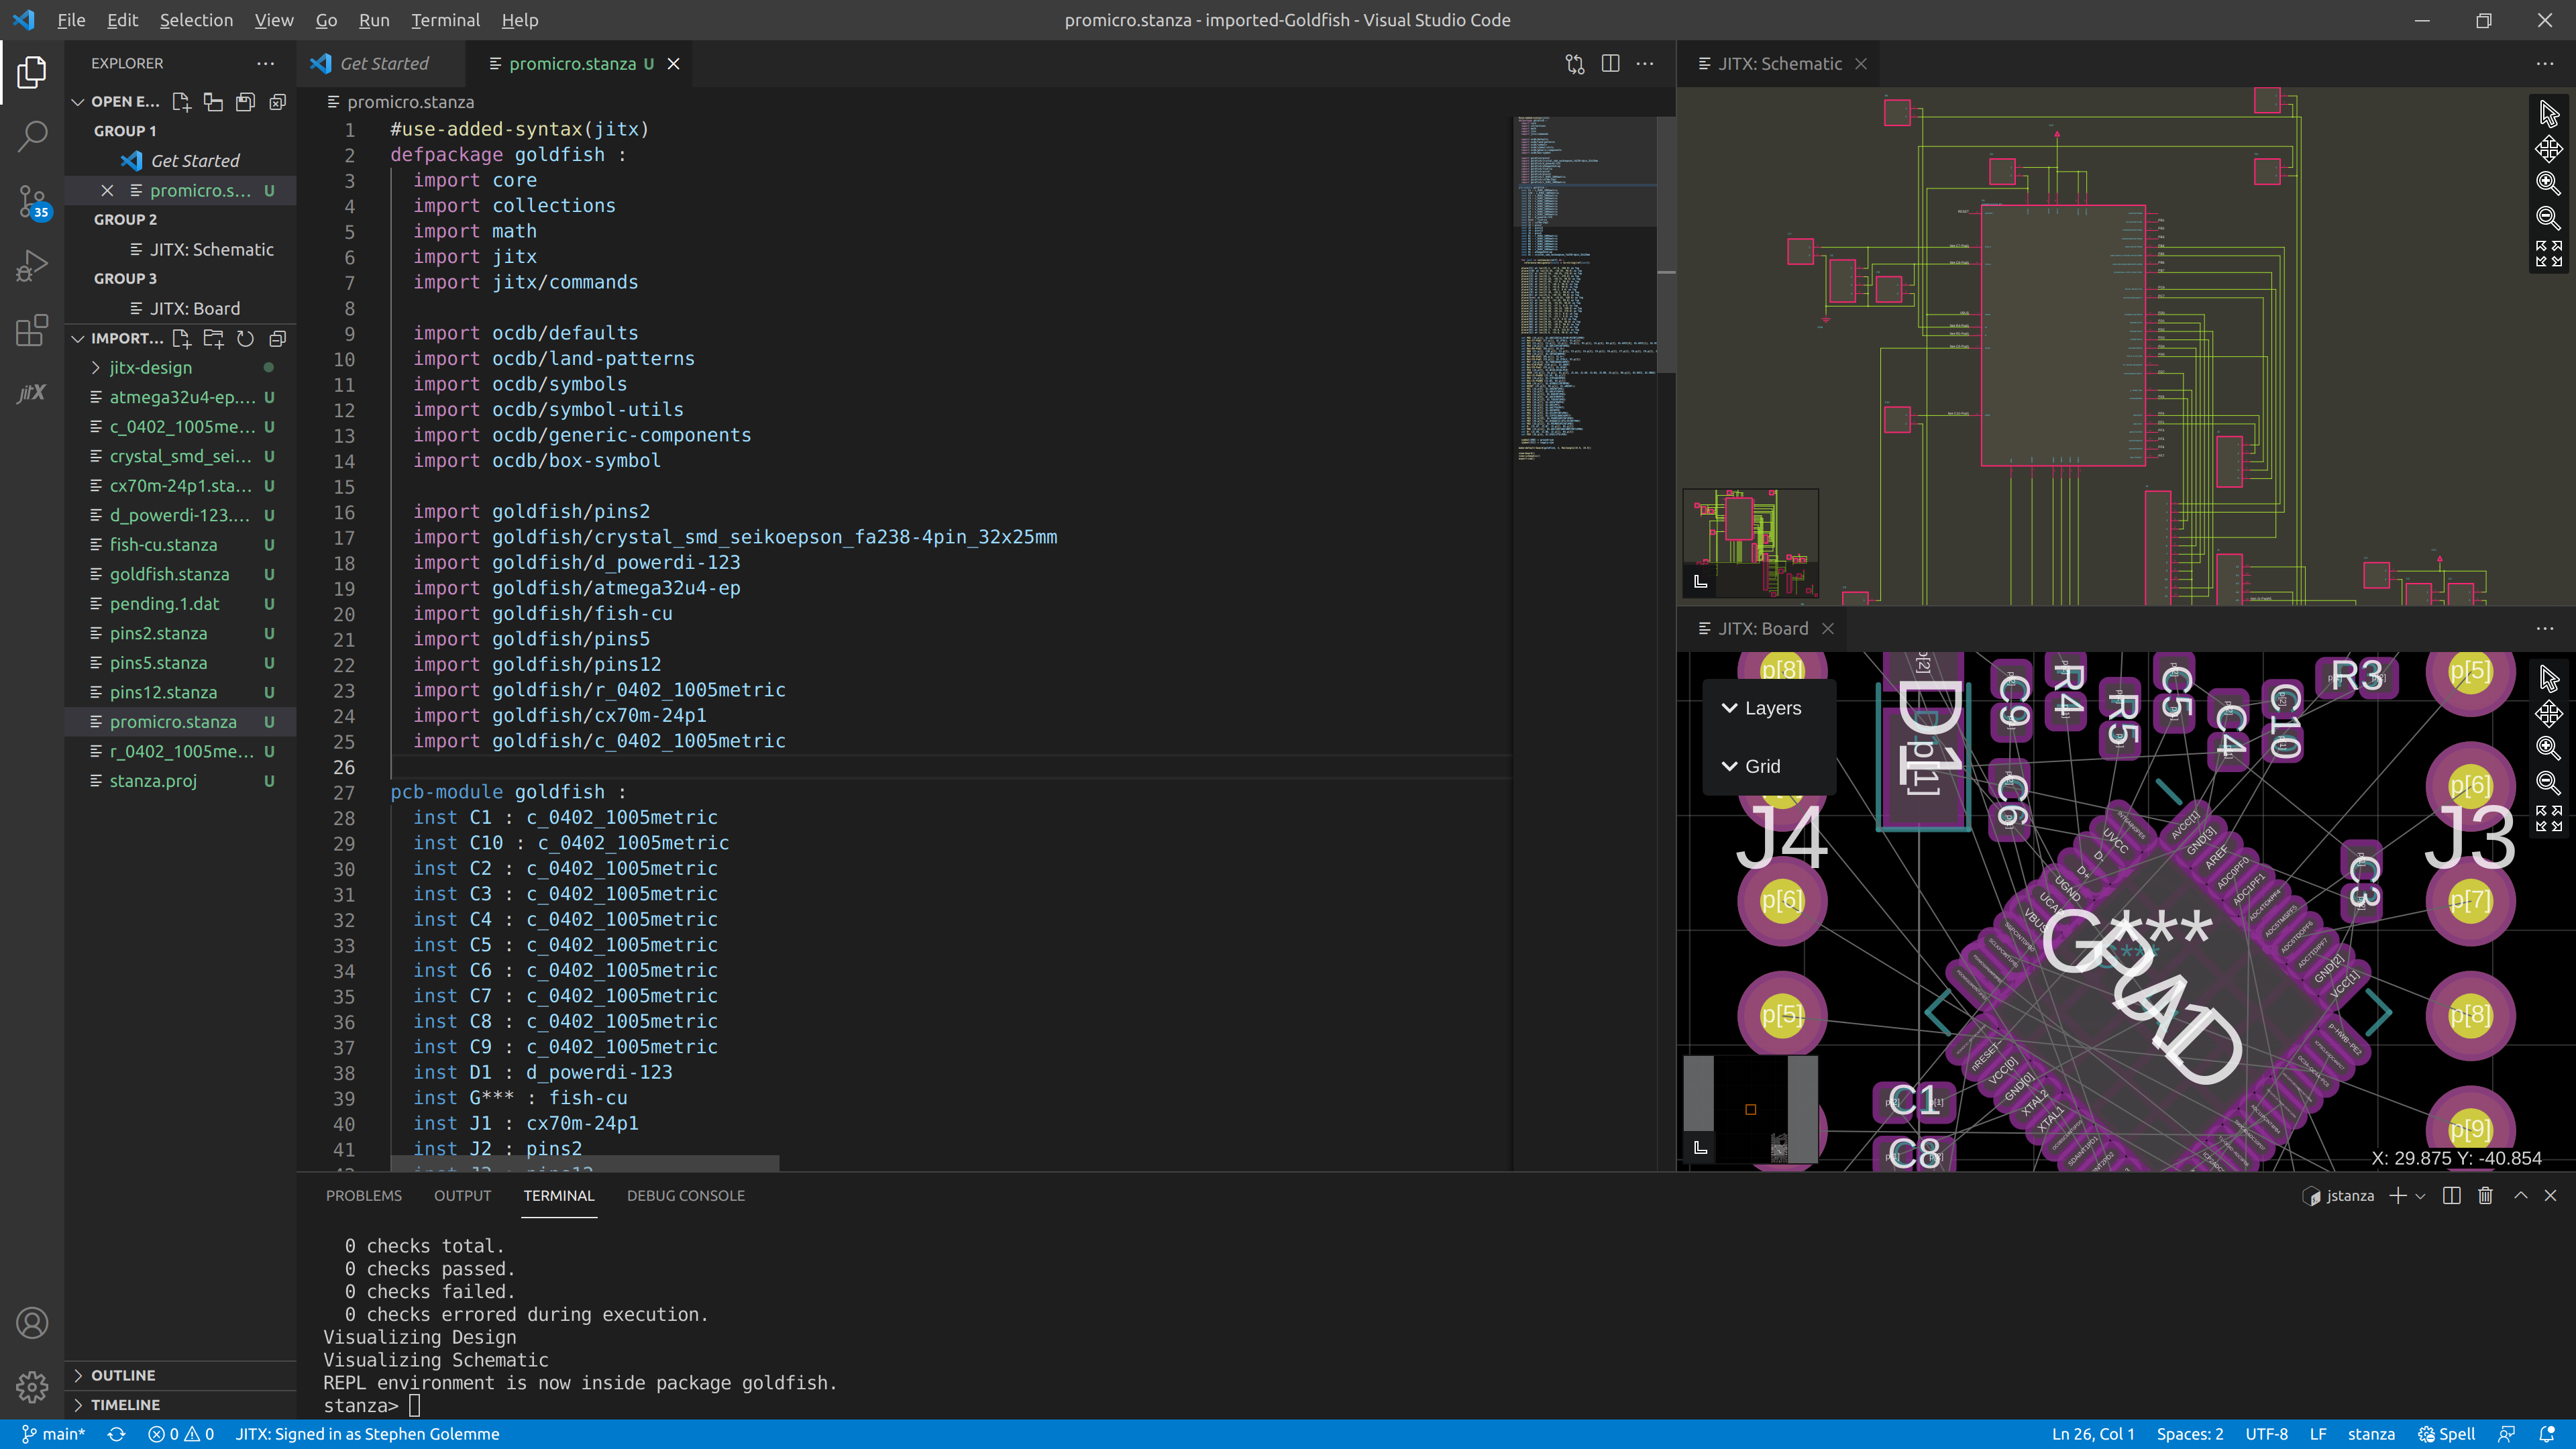 image showing VSCode in 3 groups: promicro.stanza, schematic, and layout